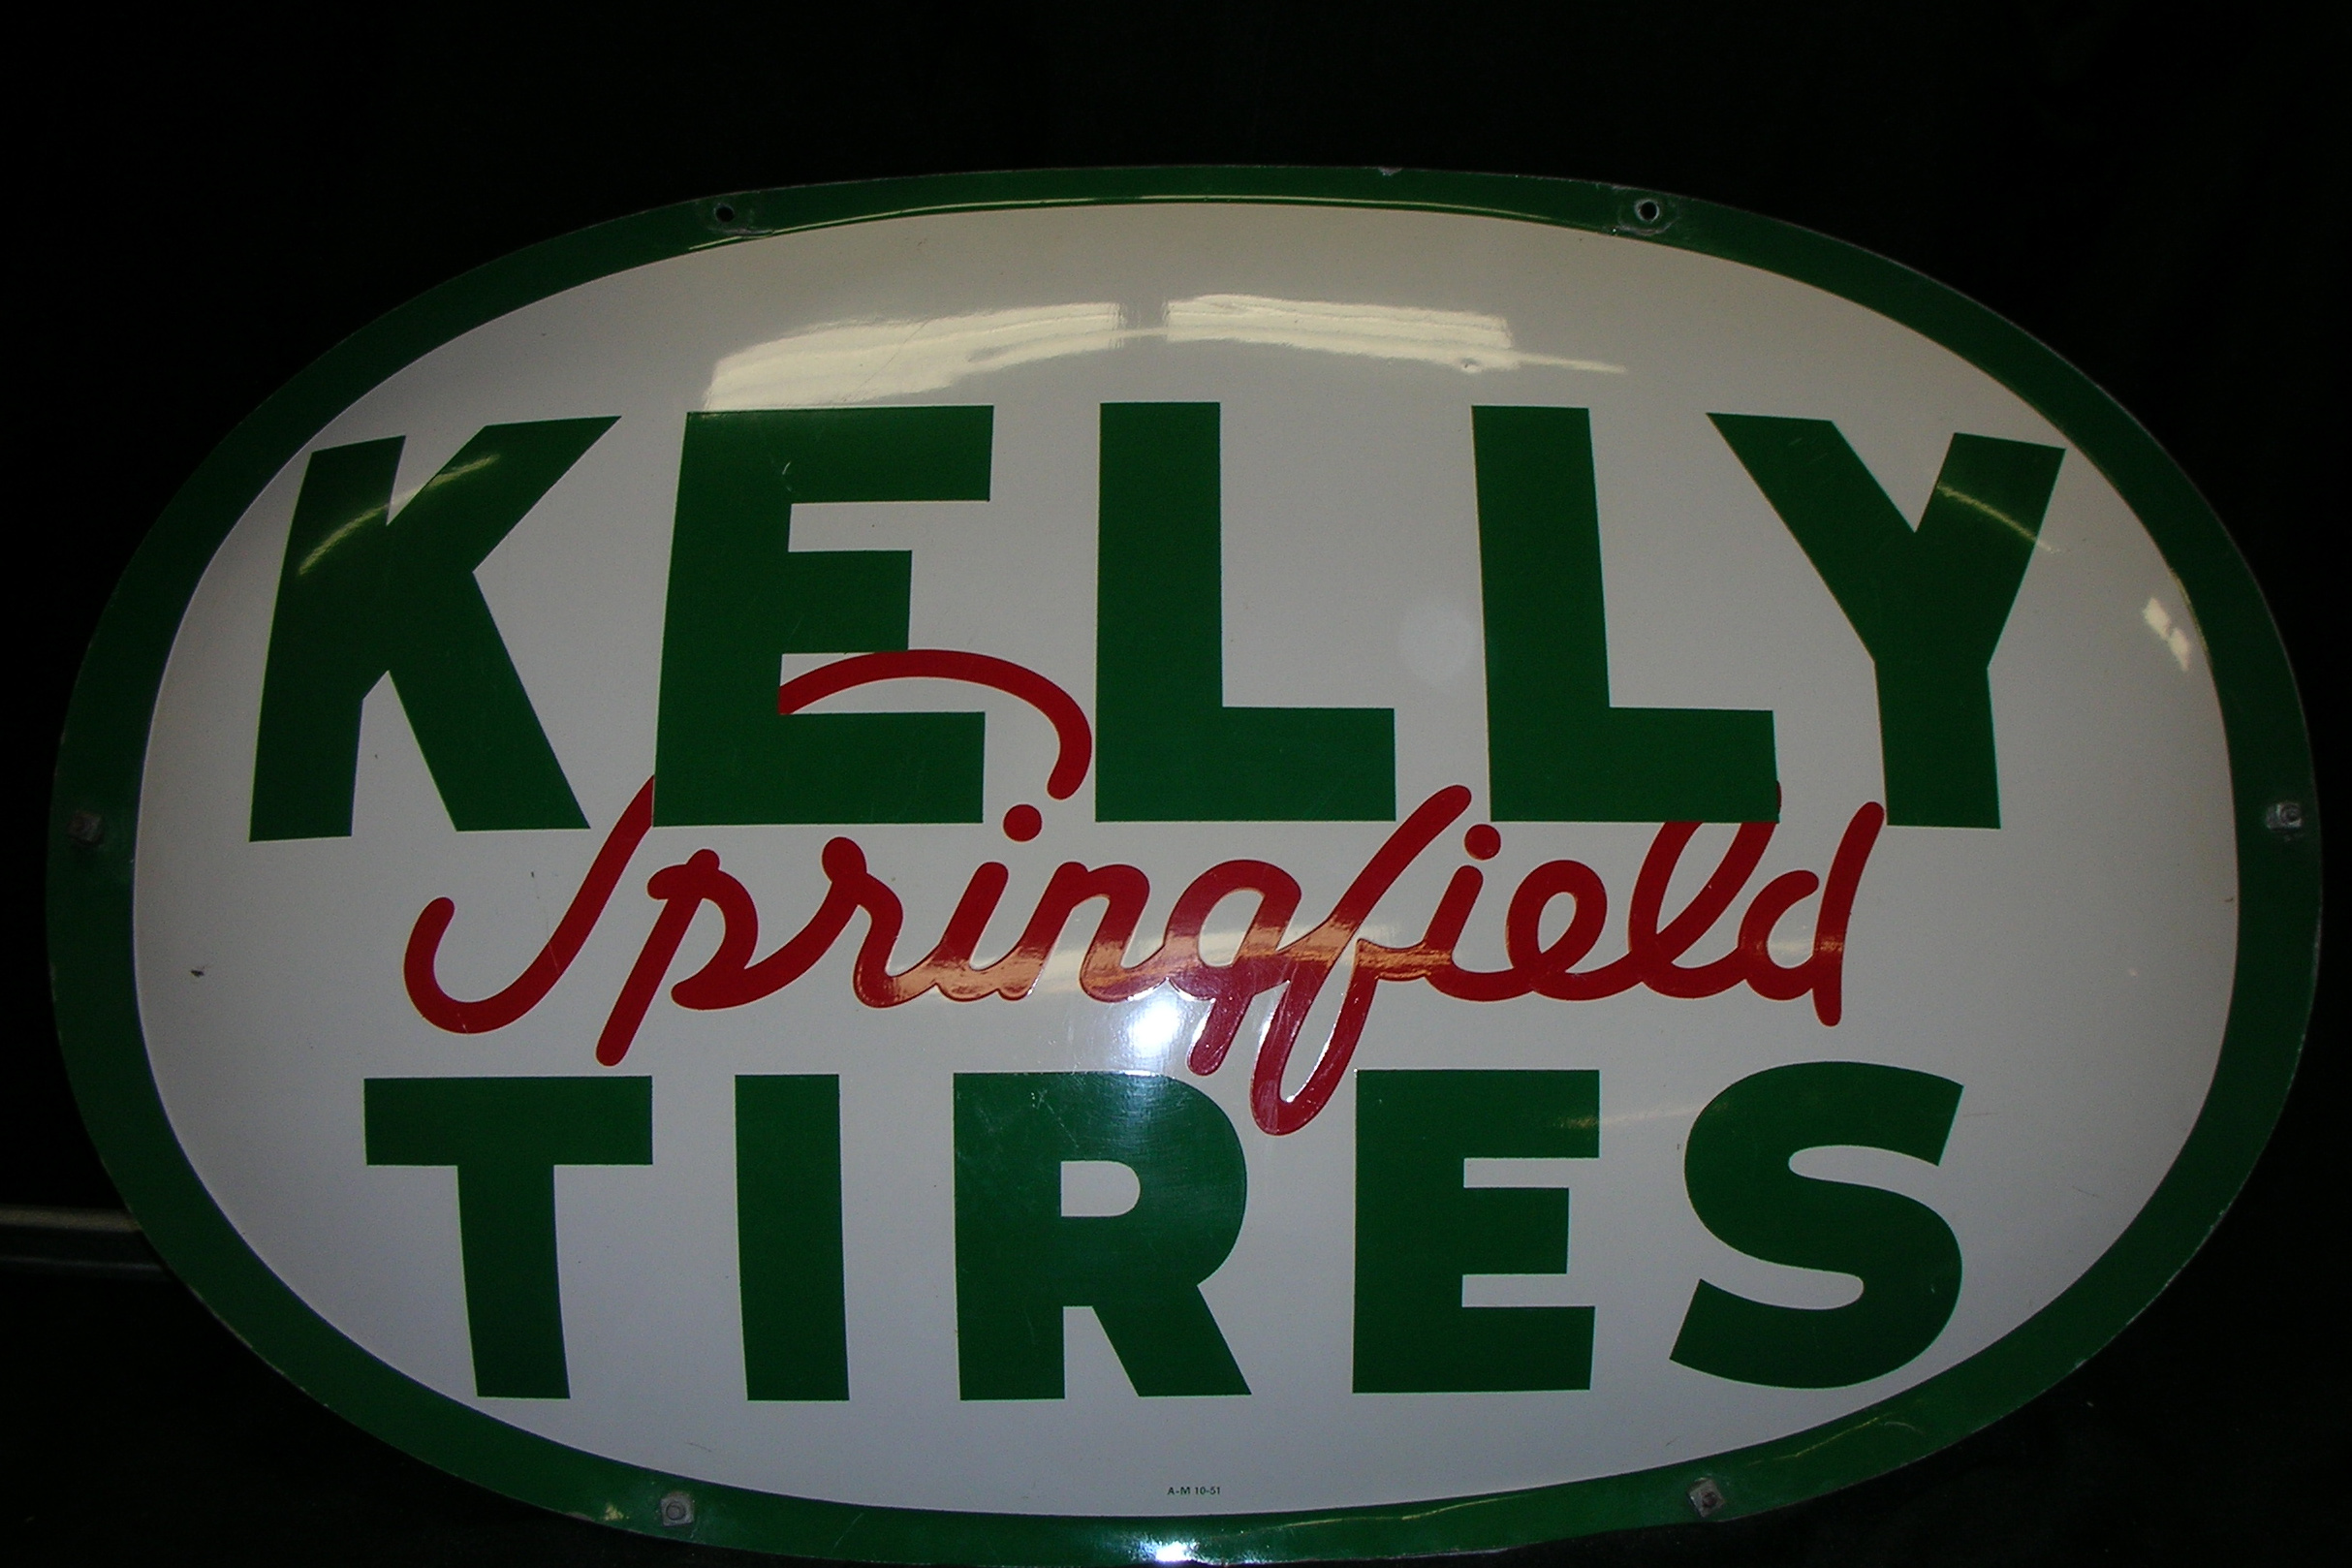 0th Image of a N/A KELLY TIRES DOUBLE BUBBLE SIGN